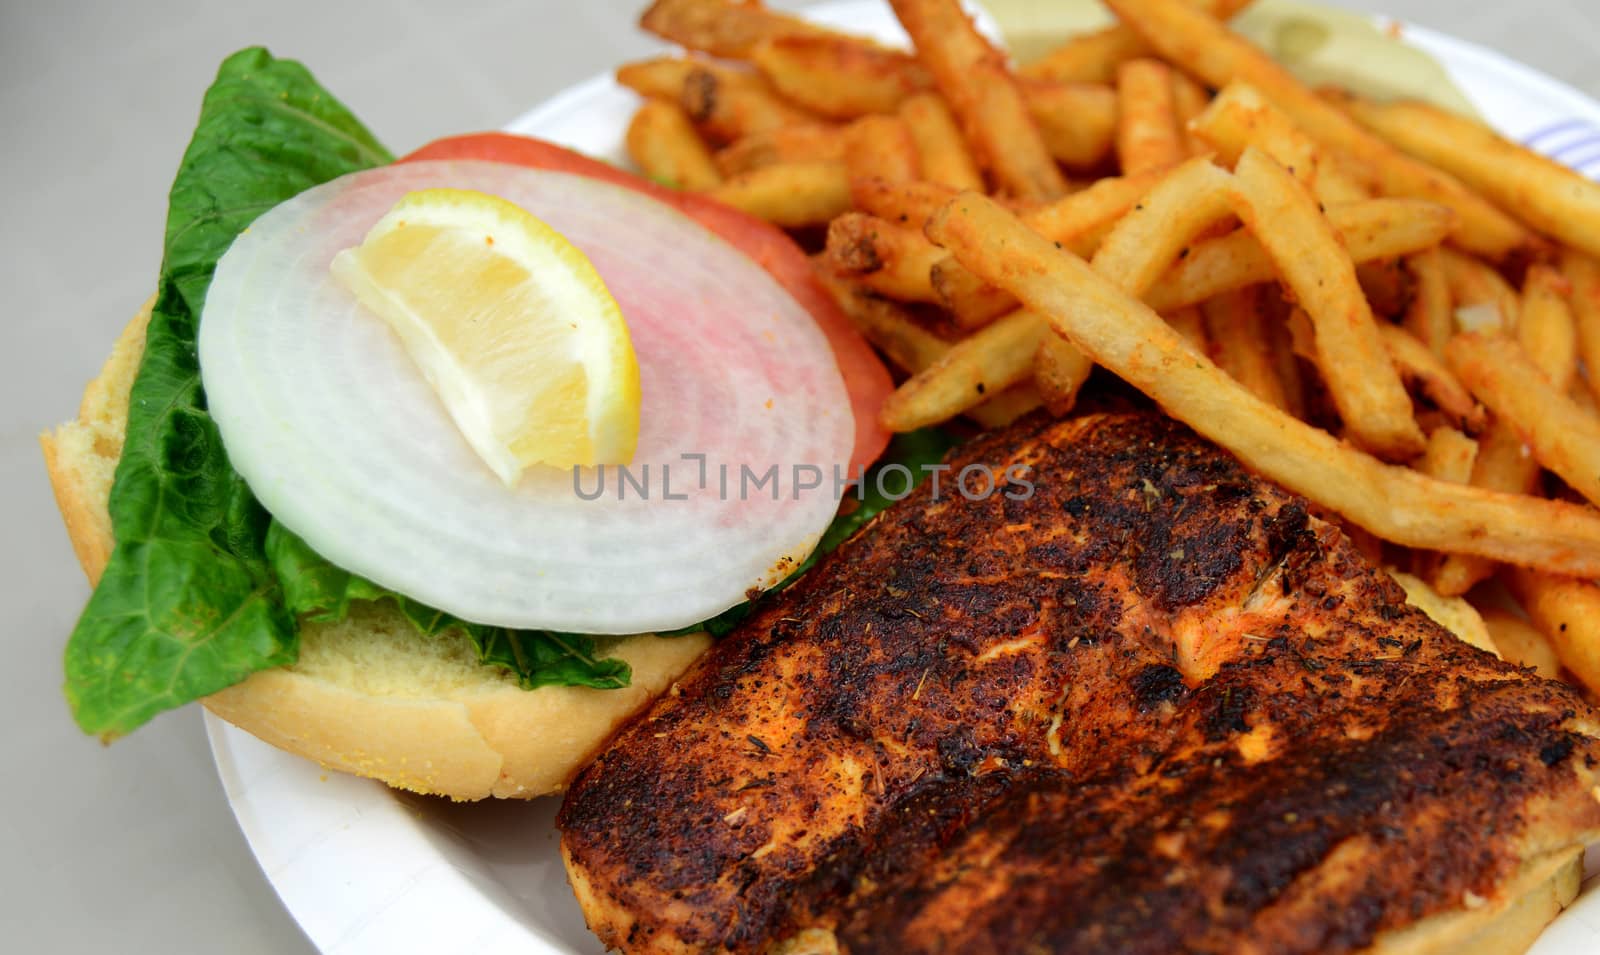 blackened fish sandwich with lettuce, tomato and onion